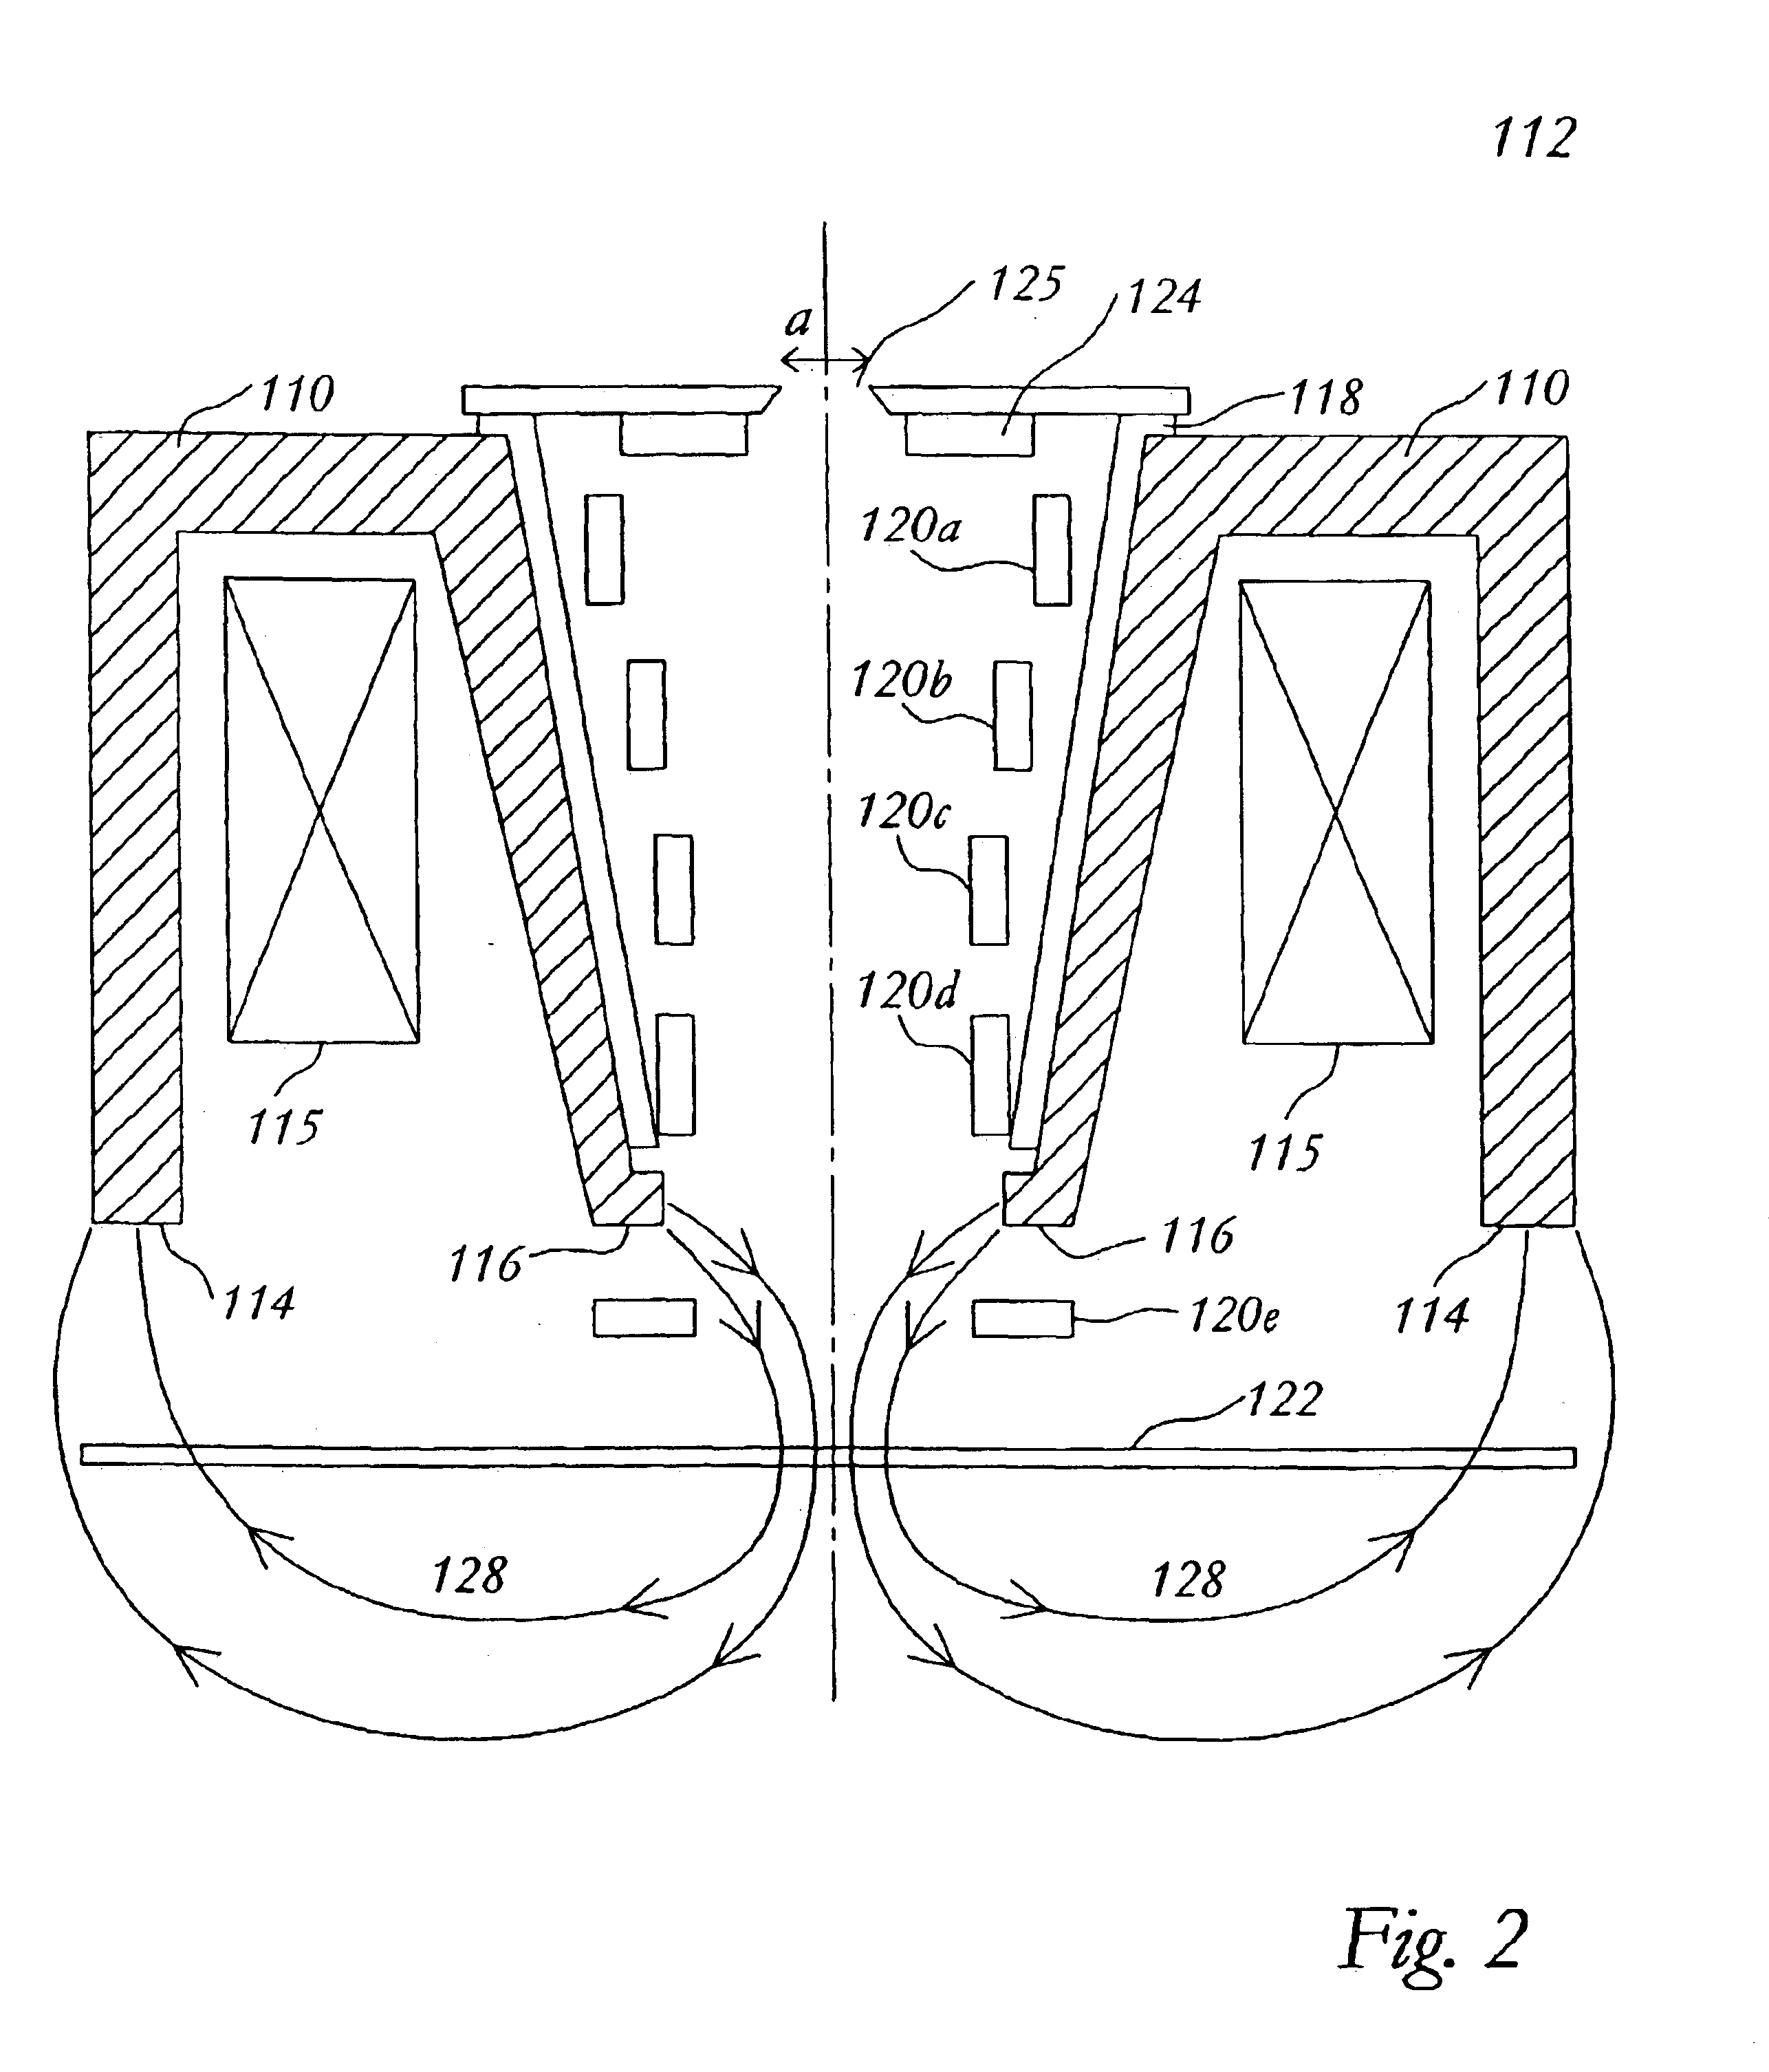 Swinging objective retarding immersion lens electron optics focusing, deflection and signal collection system and method